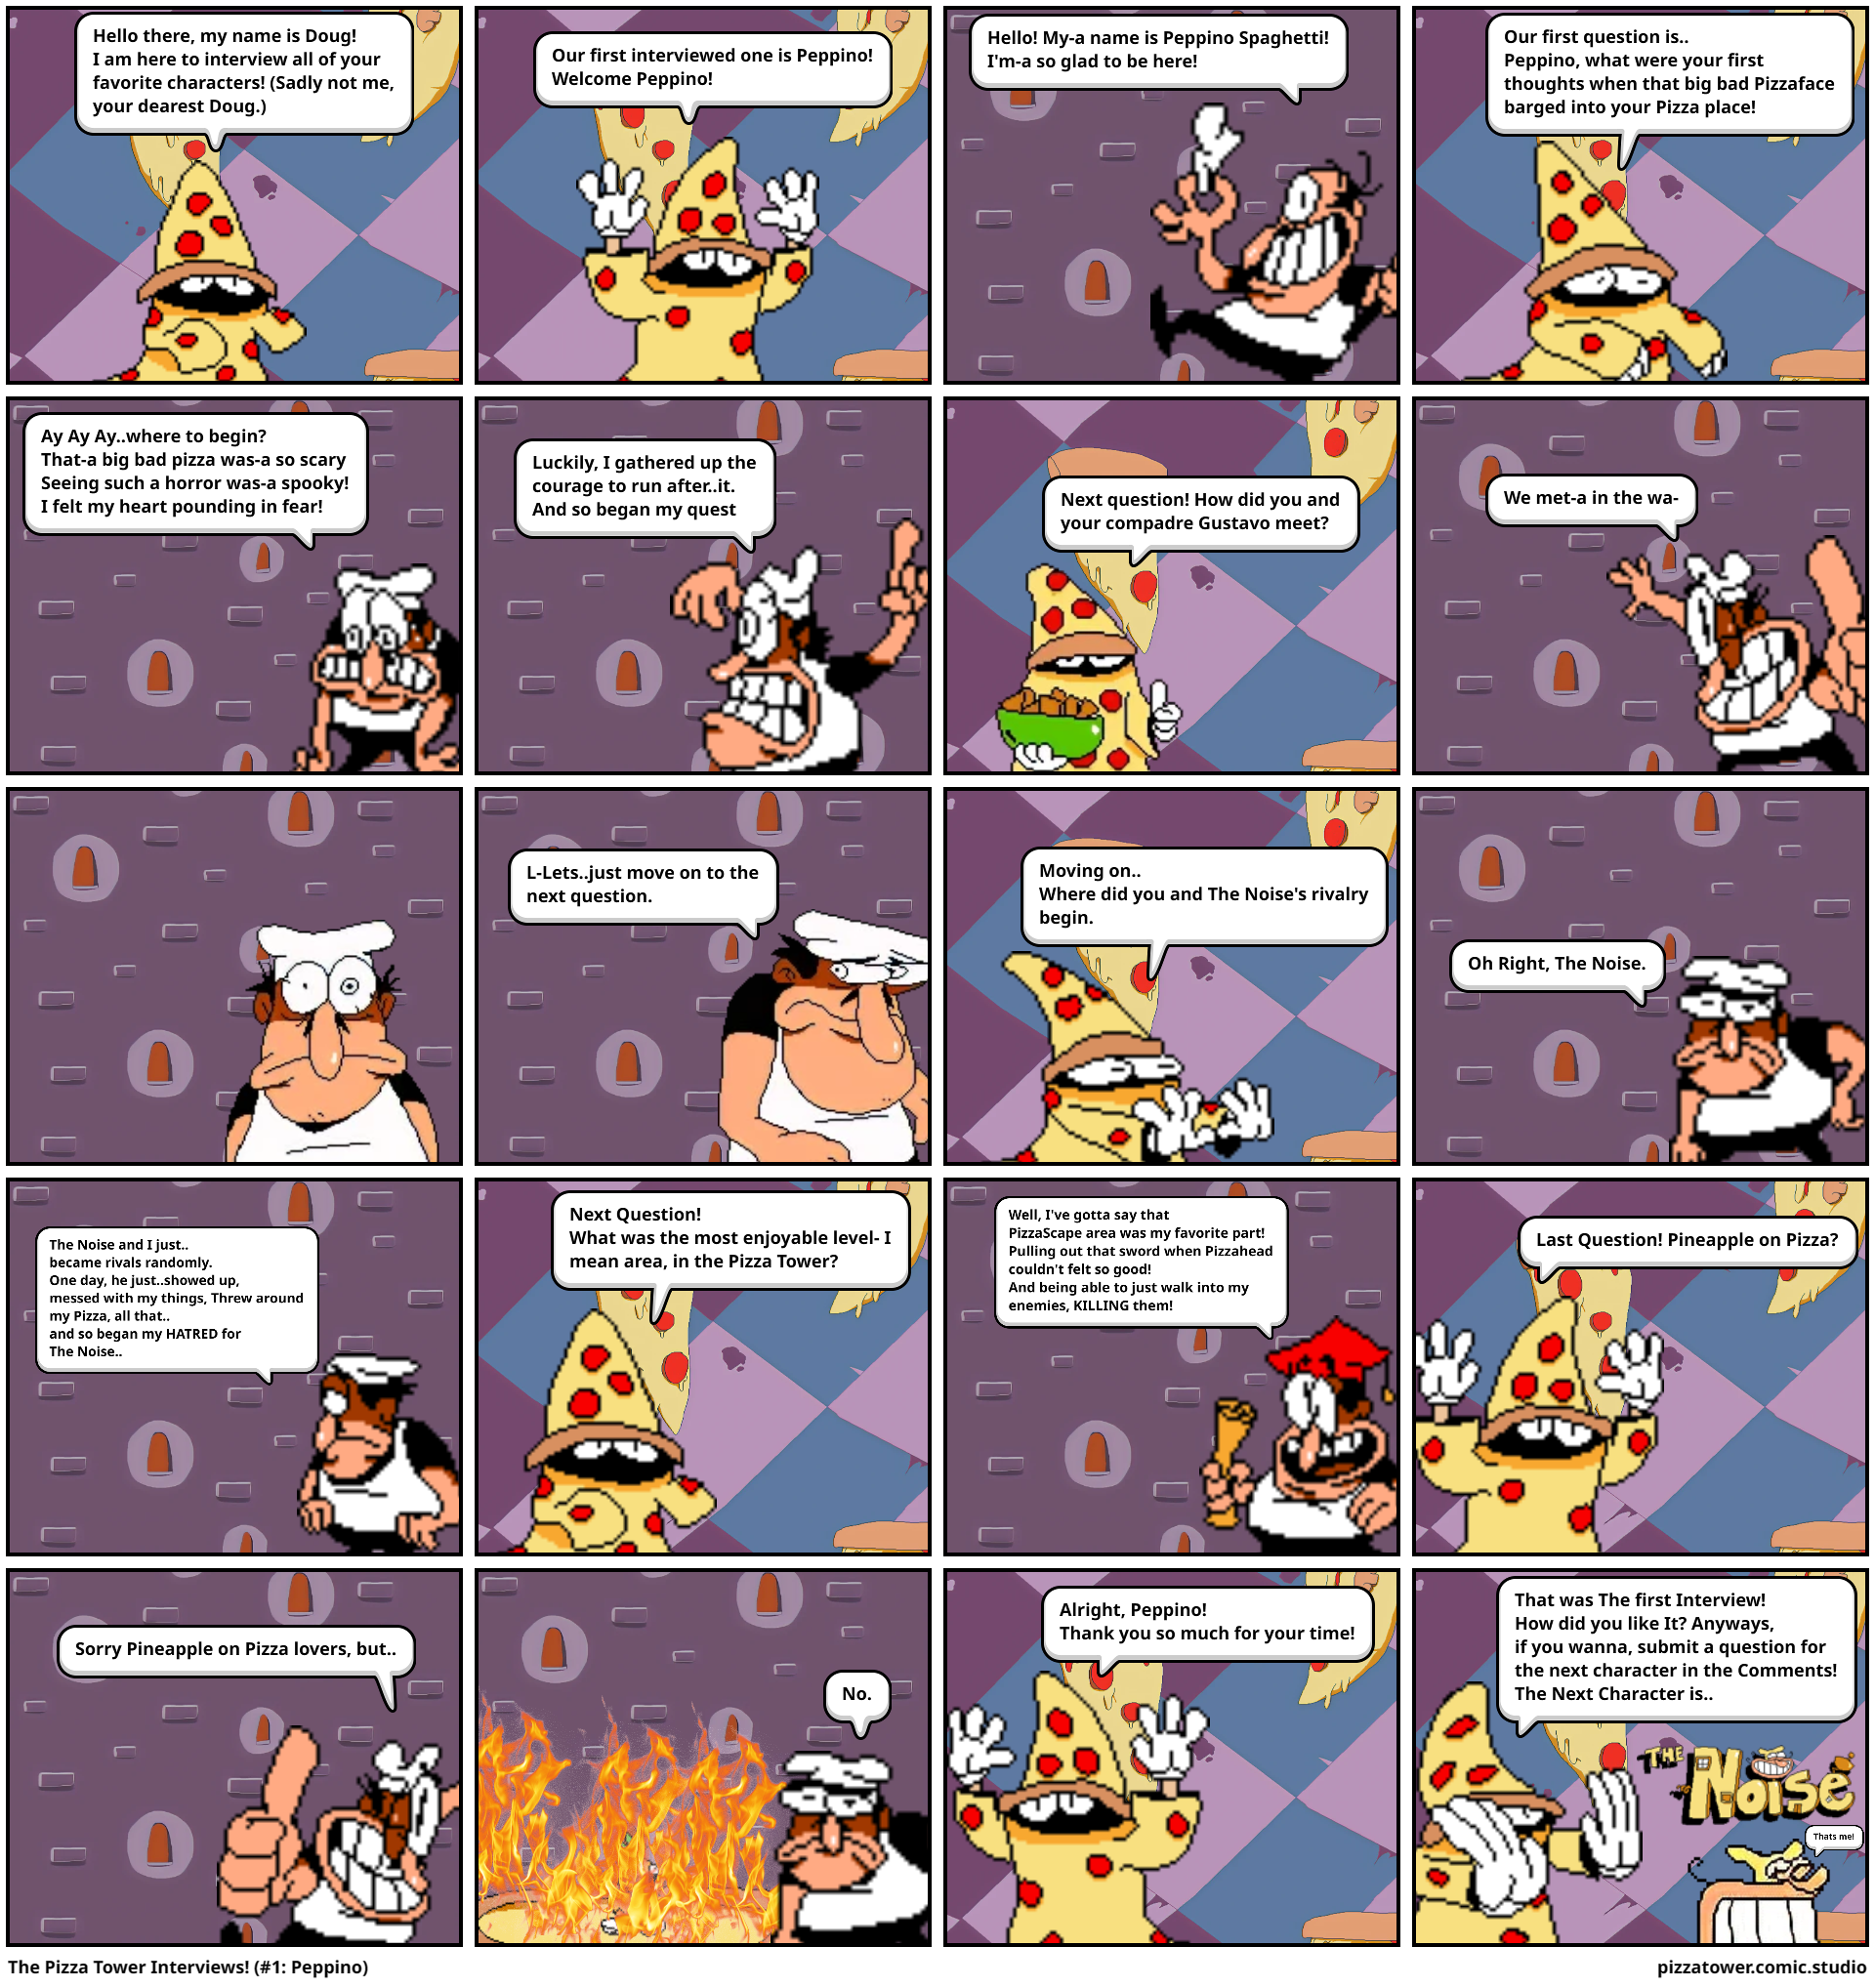 The Pizza Tower Interviews! (#1: Peppino)